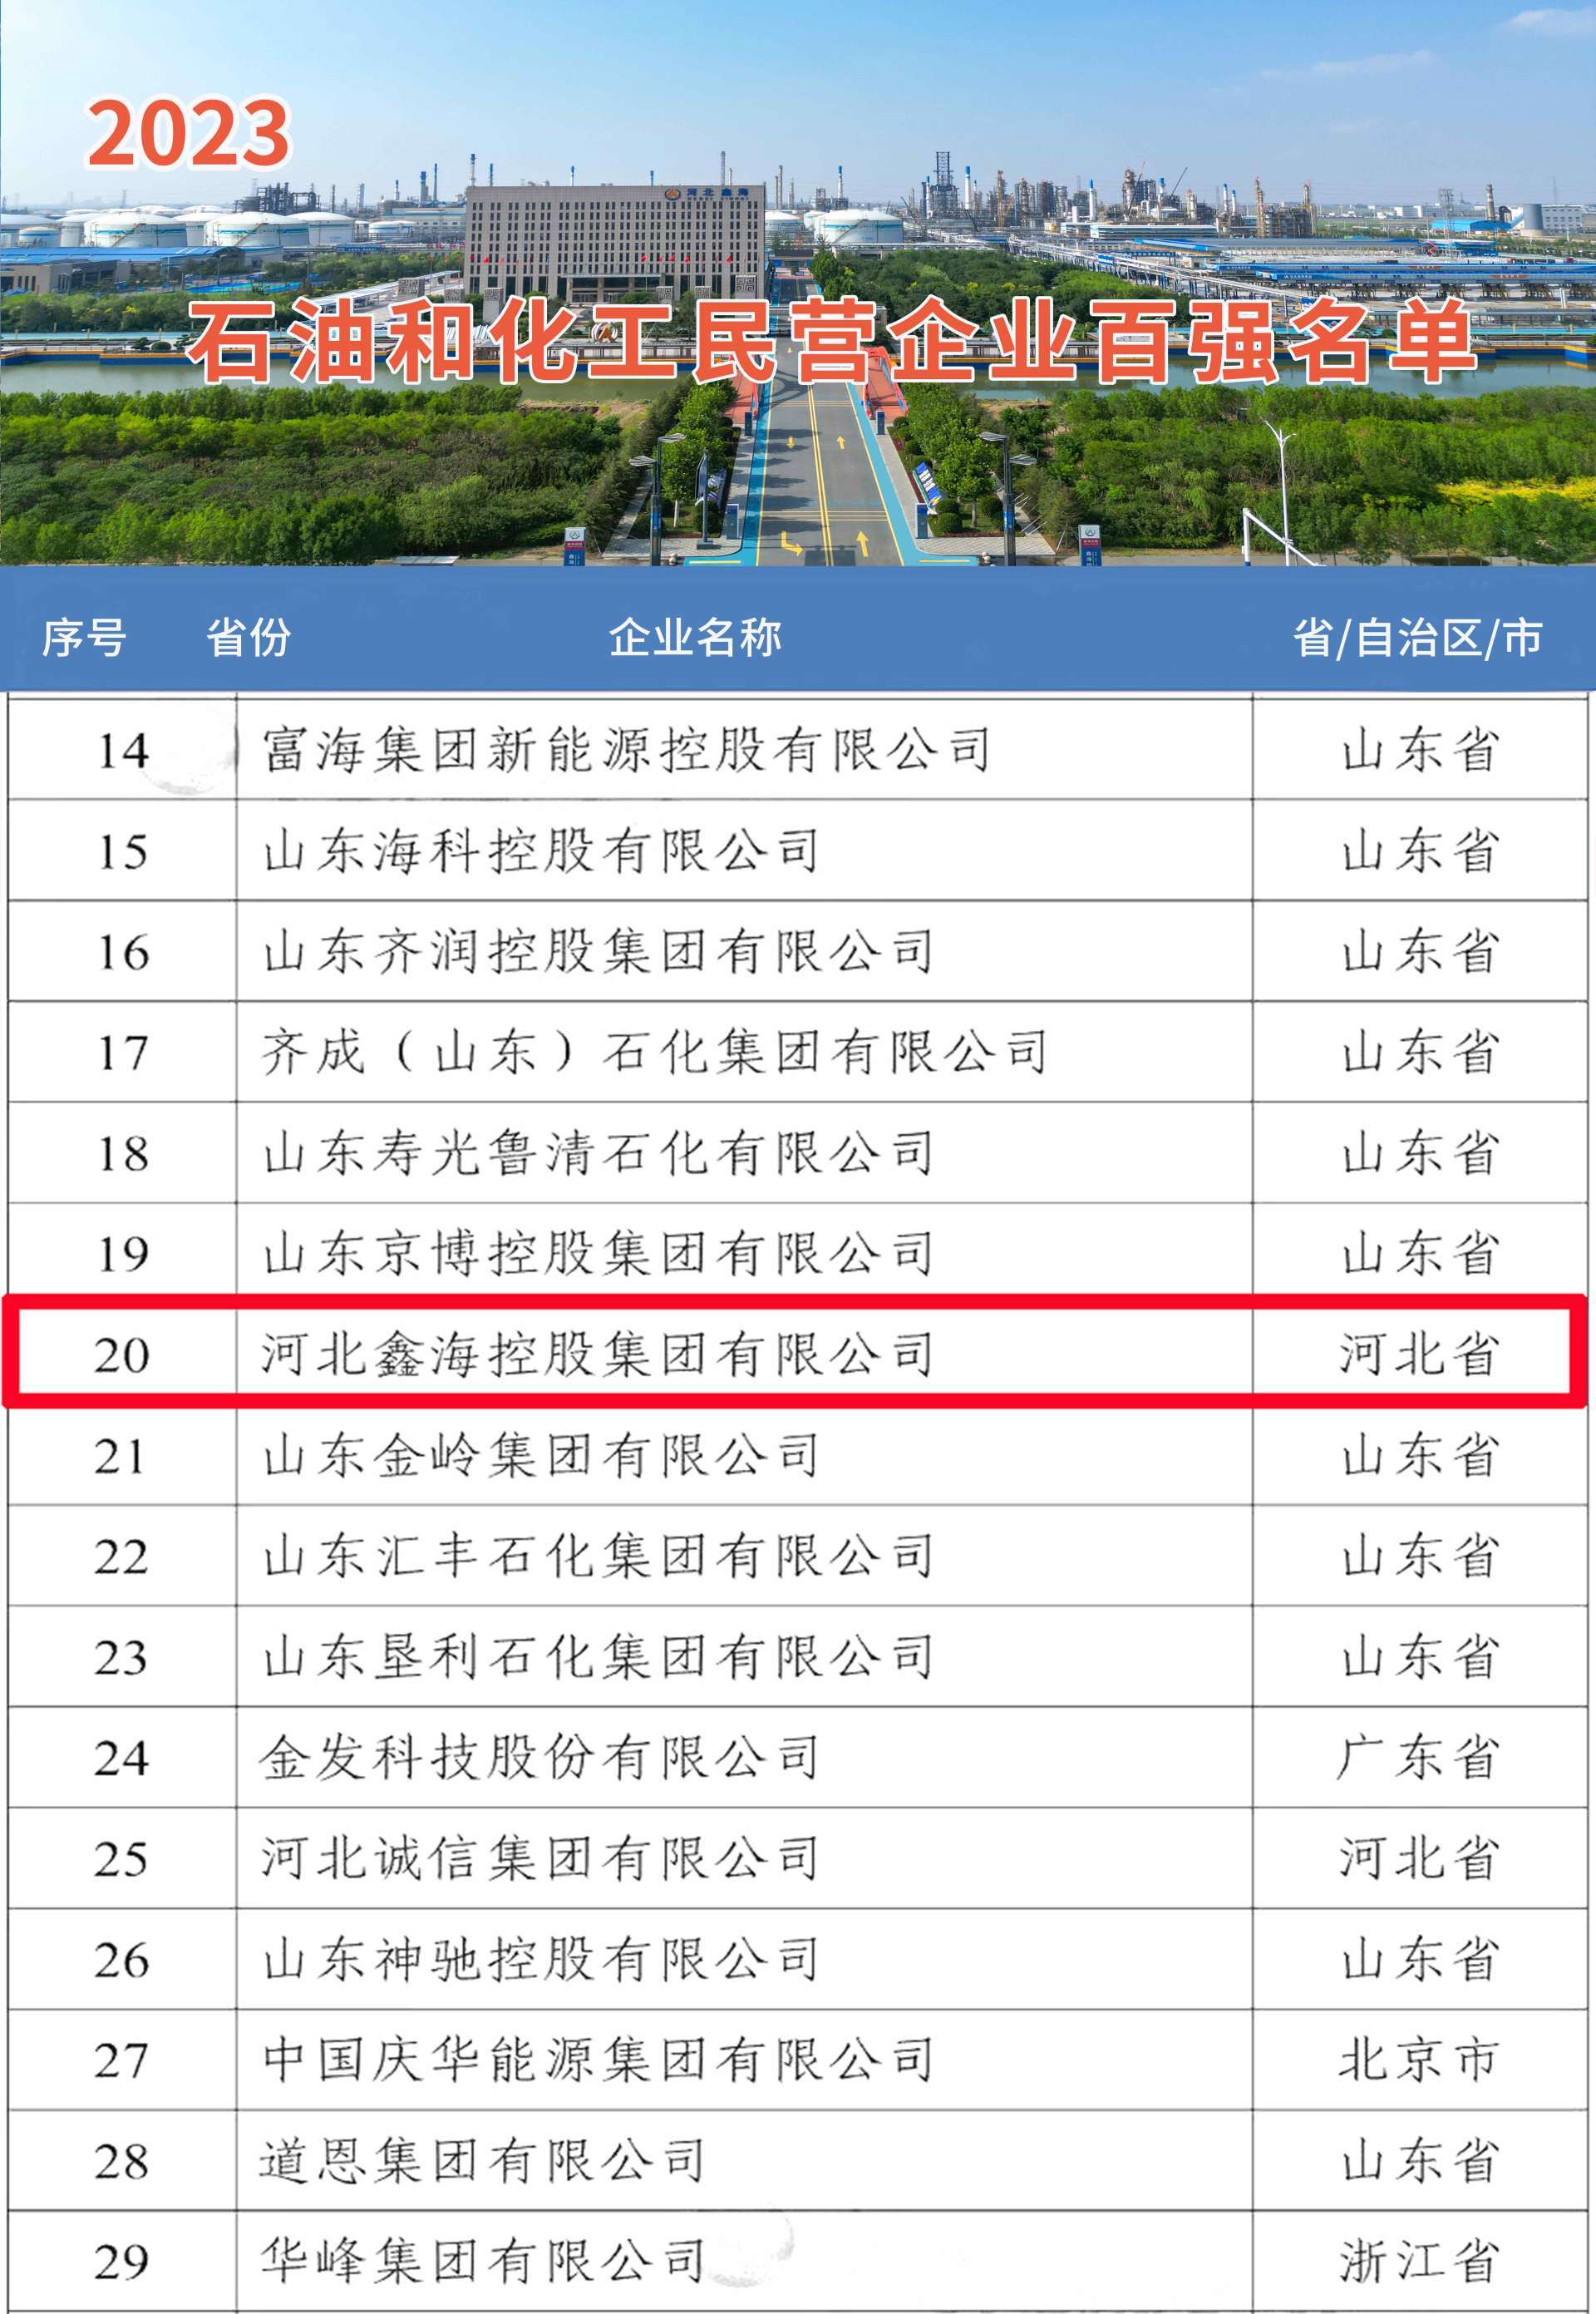 2023 Top 100 Petroleum and Chemical Private Enterprises Released, Xinhai Holding Group Ranked 20th